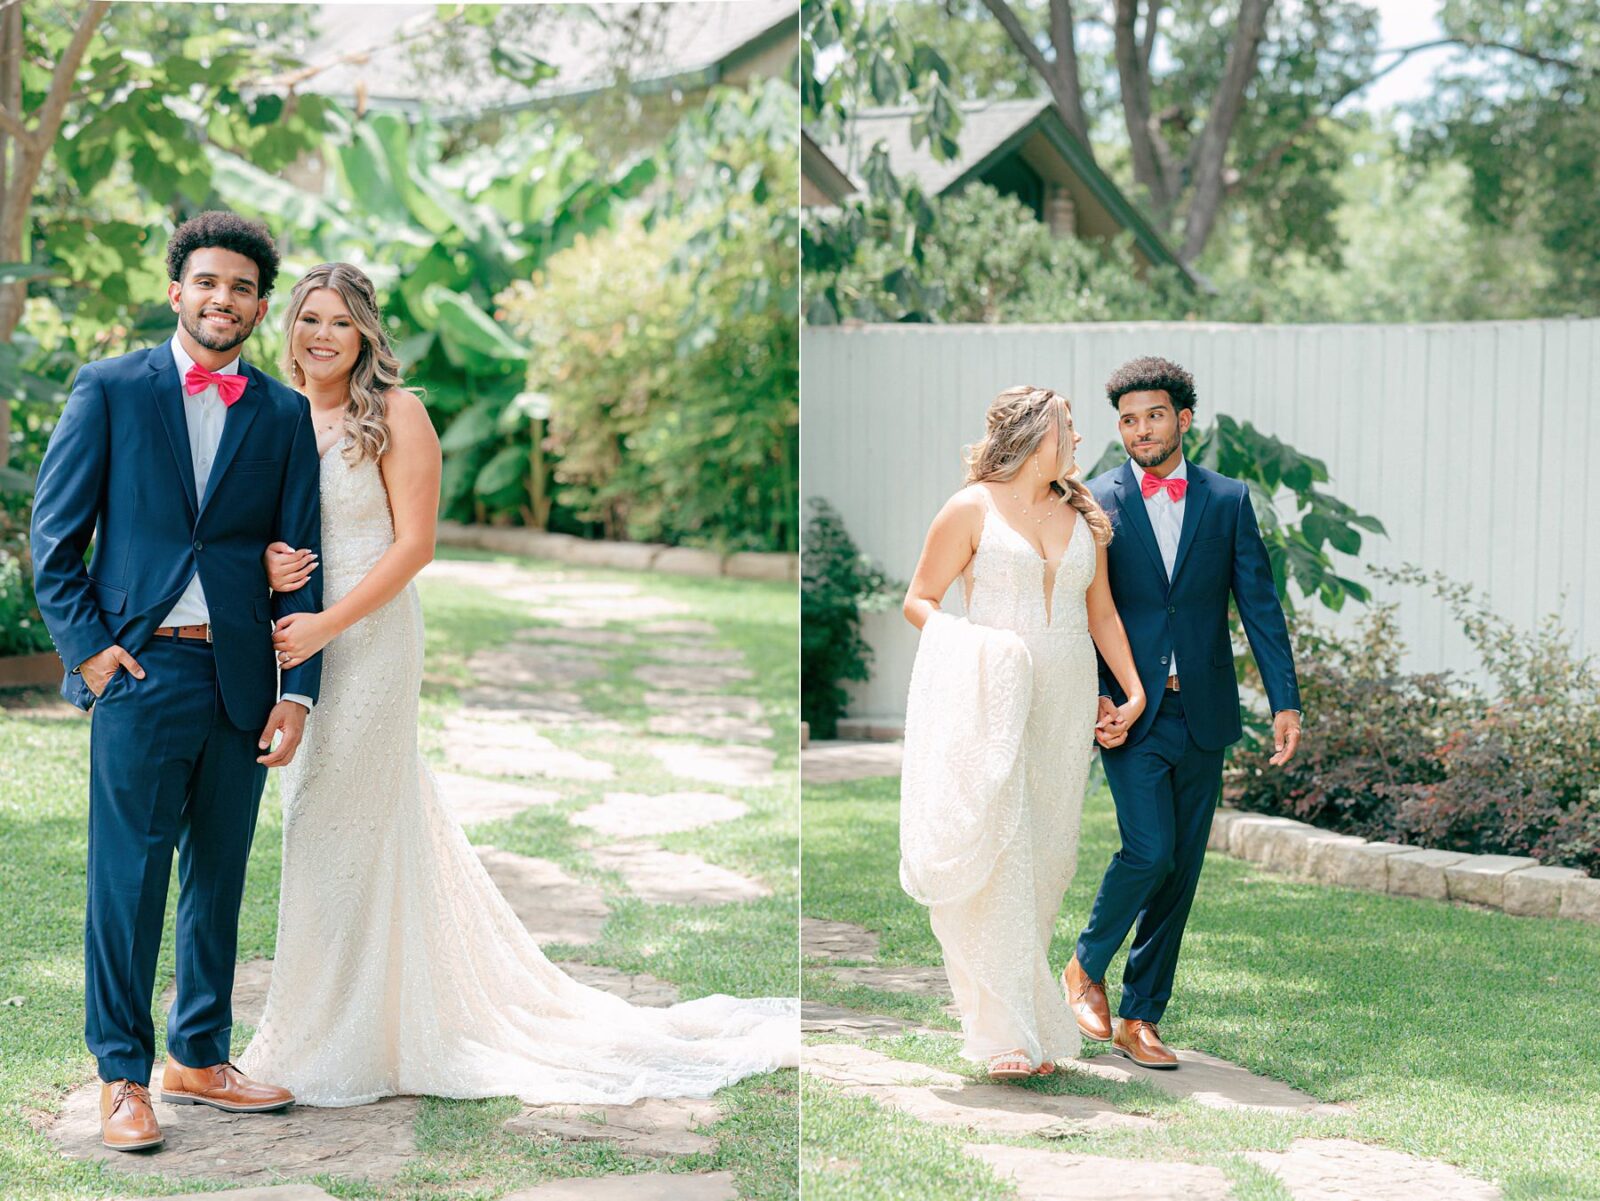 bride and groom portraits, Austin Wedding at Hummingbird House, with wedding photos by Tara Lyons Photography. Other vendors: Mistique Makeup, Cana Events, Twin Flame Events, Simply Chic Event Rentals, Live Oak Photo Booth